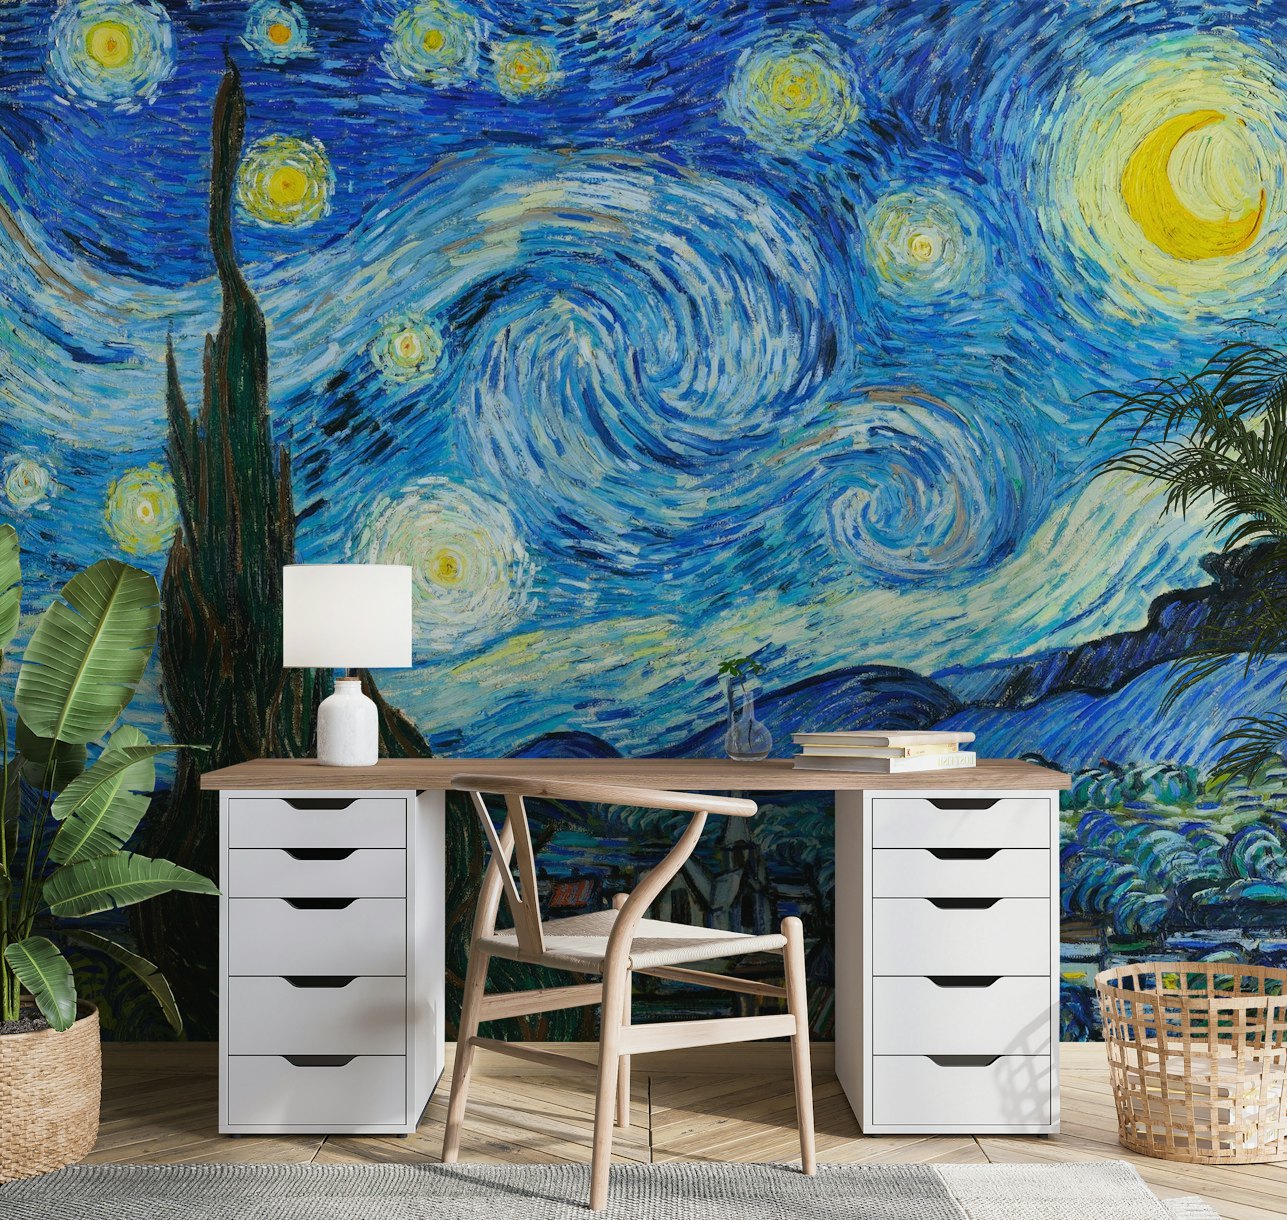 The starry night wallpaper